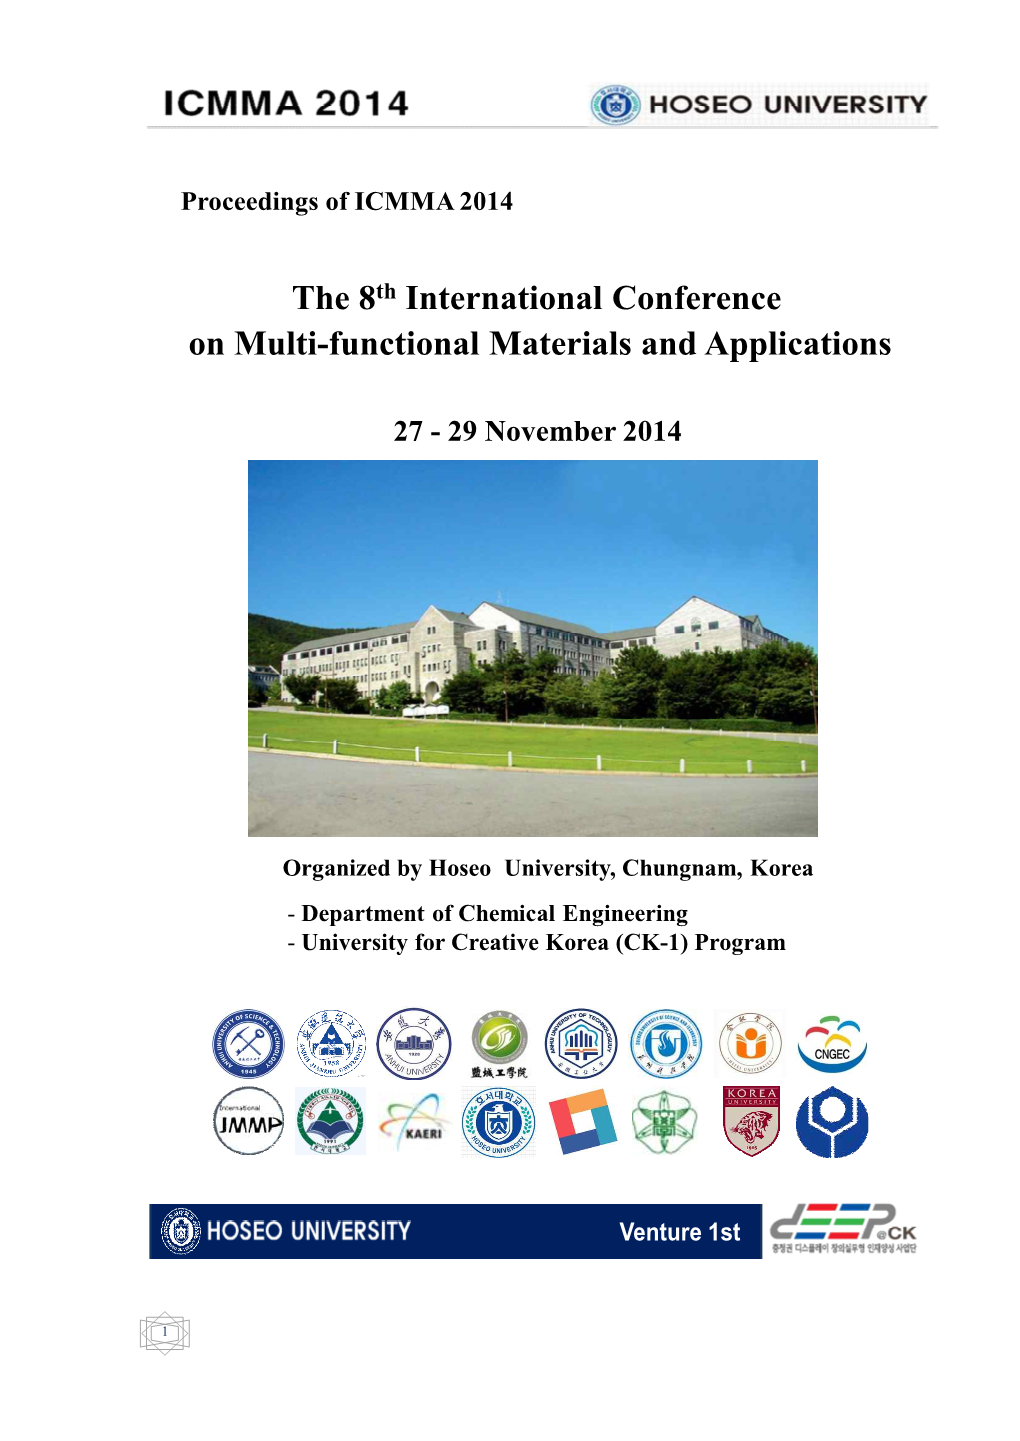 The 8Th International Conference on Multi-Functional Materials and Applications